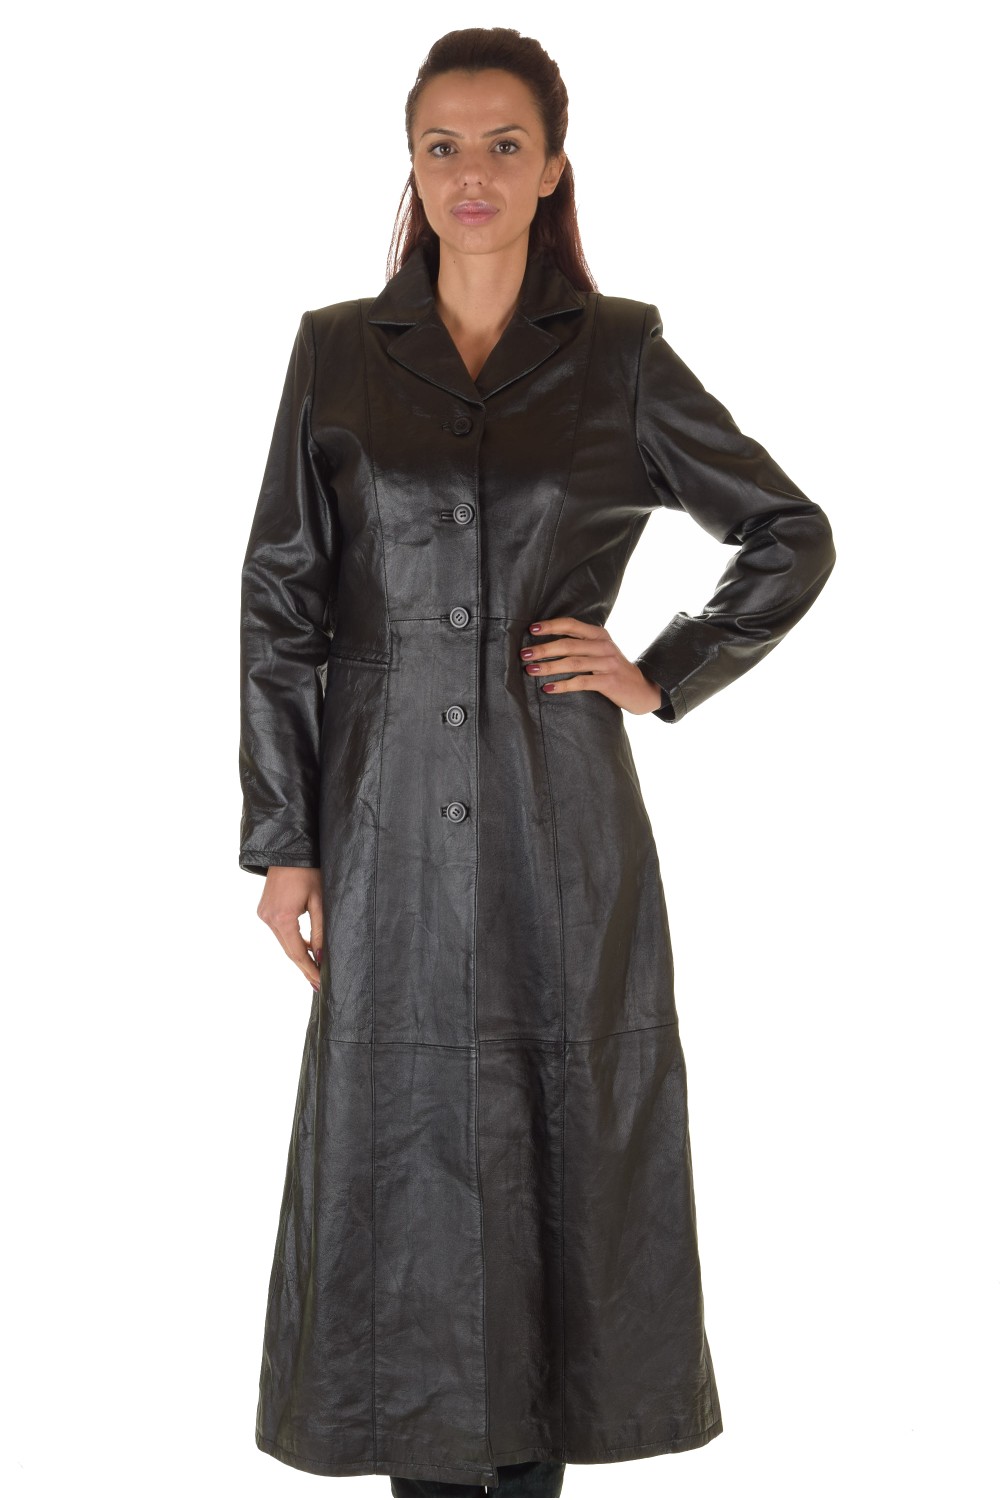 Leather trenchcoat | furlando - leather and fur.